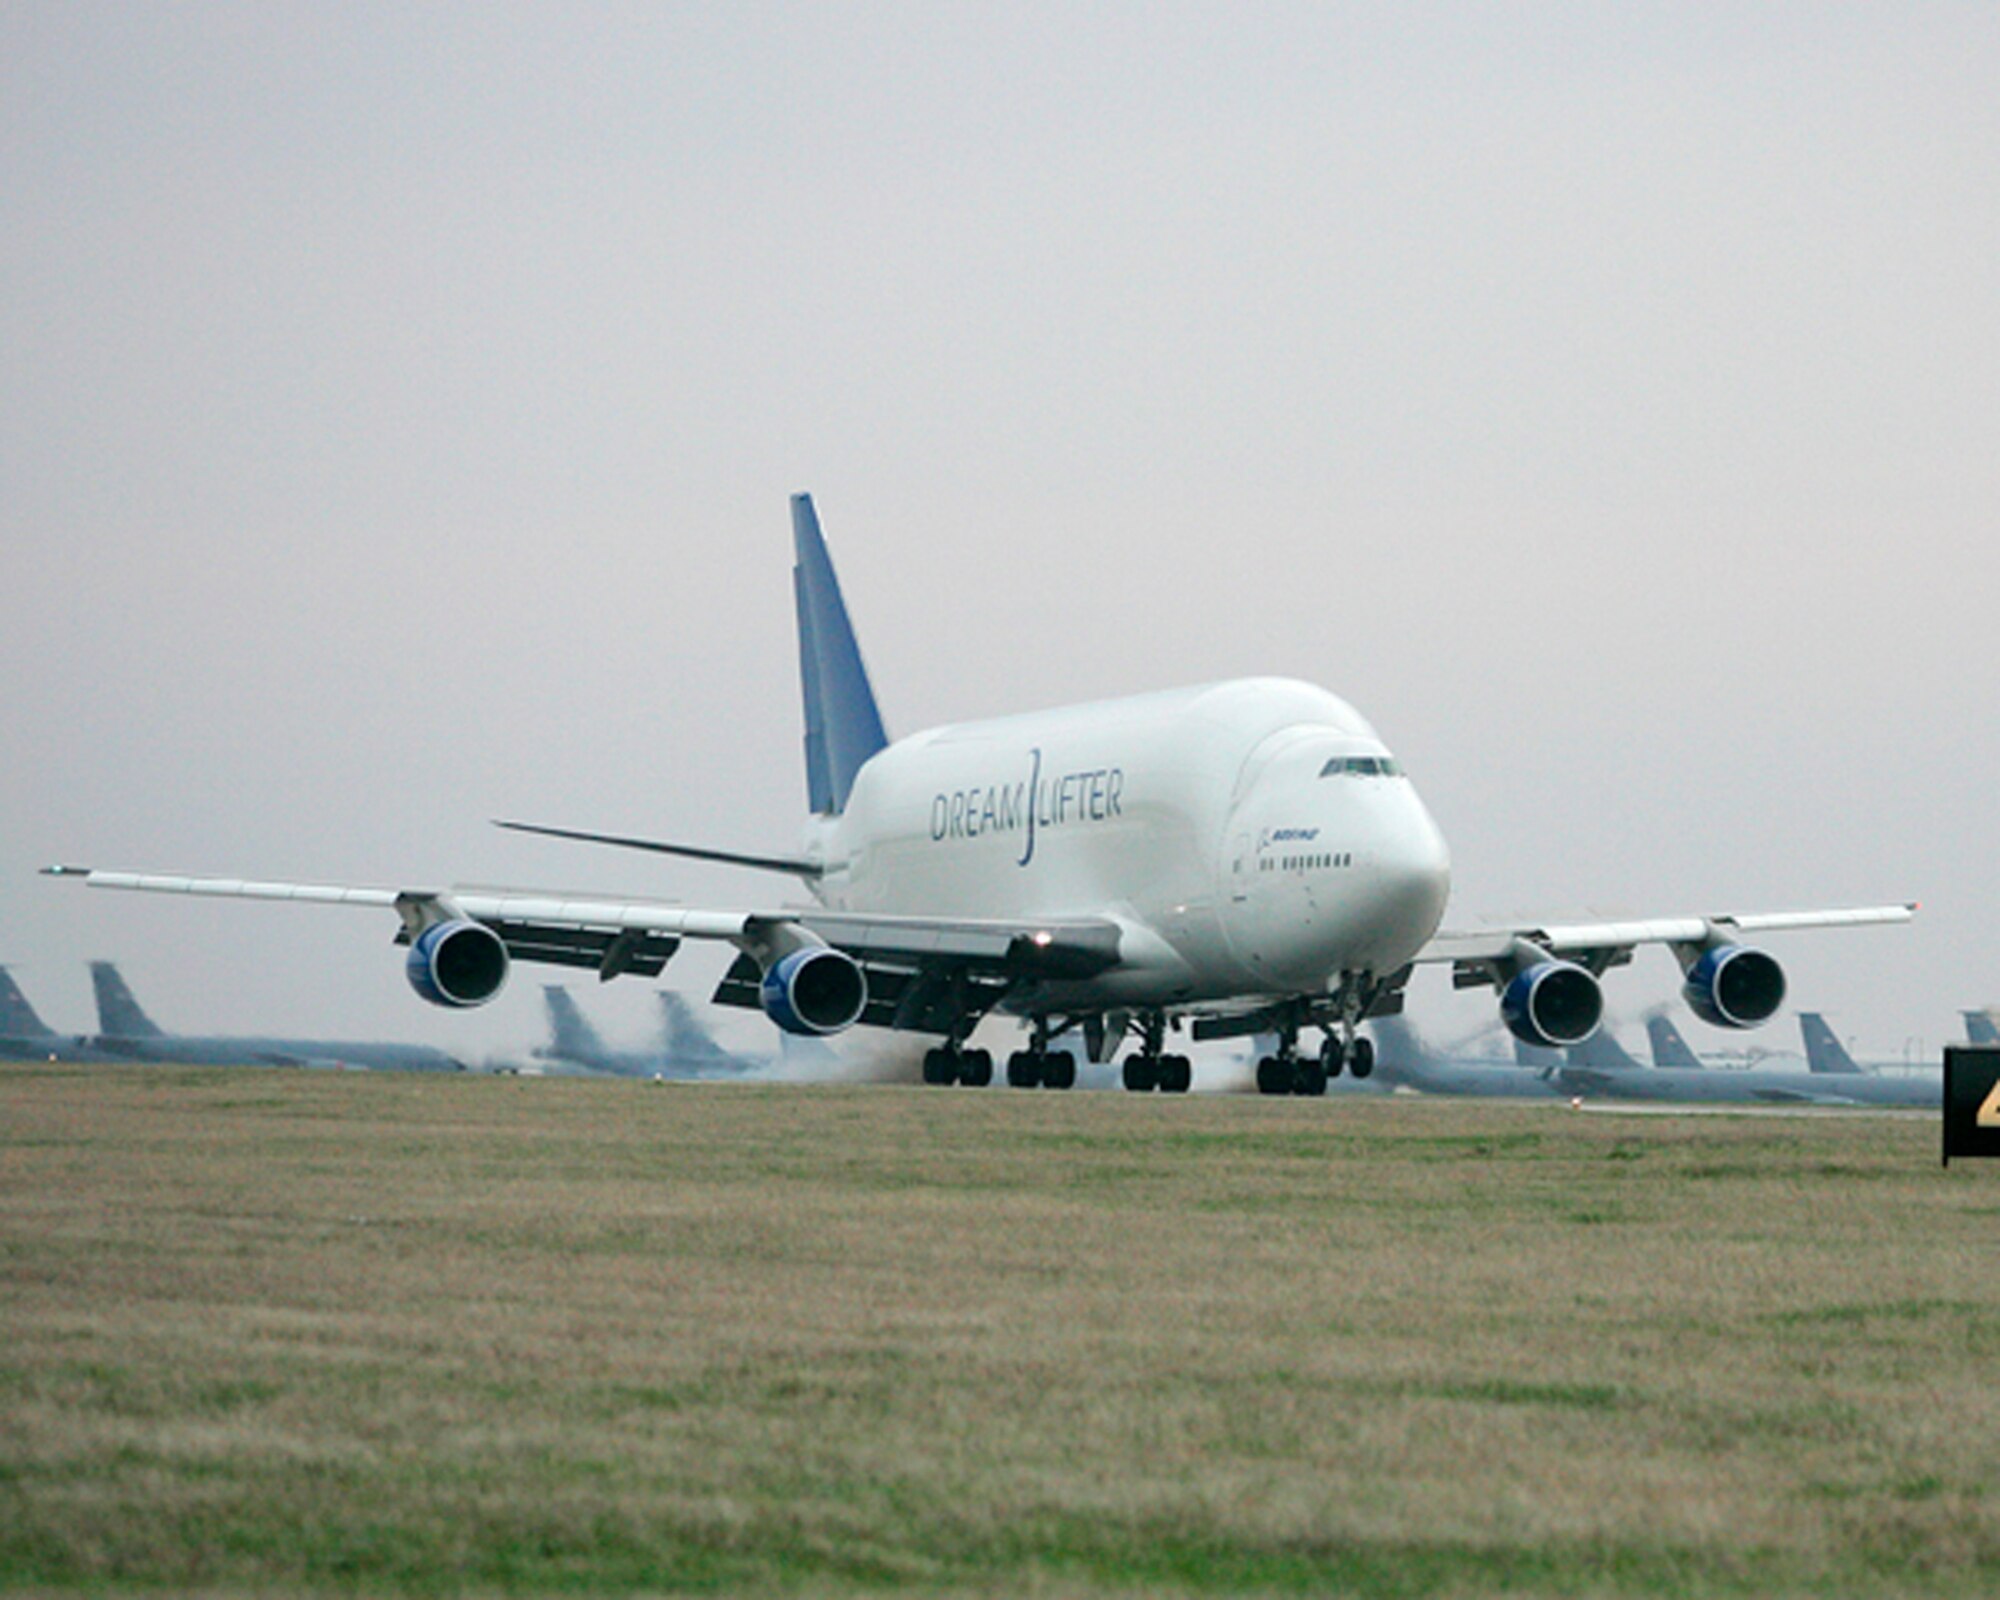 A modified Boeing 747 freighter arrives at the Boeing facility at McConnell March 24. The Dreamlifter has a wingspan of more than 211 feet. It is in Wichita for maintenance and will be used to transport 787 parts from Boeing suppliers around the world. (Photo by Fred Solis)